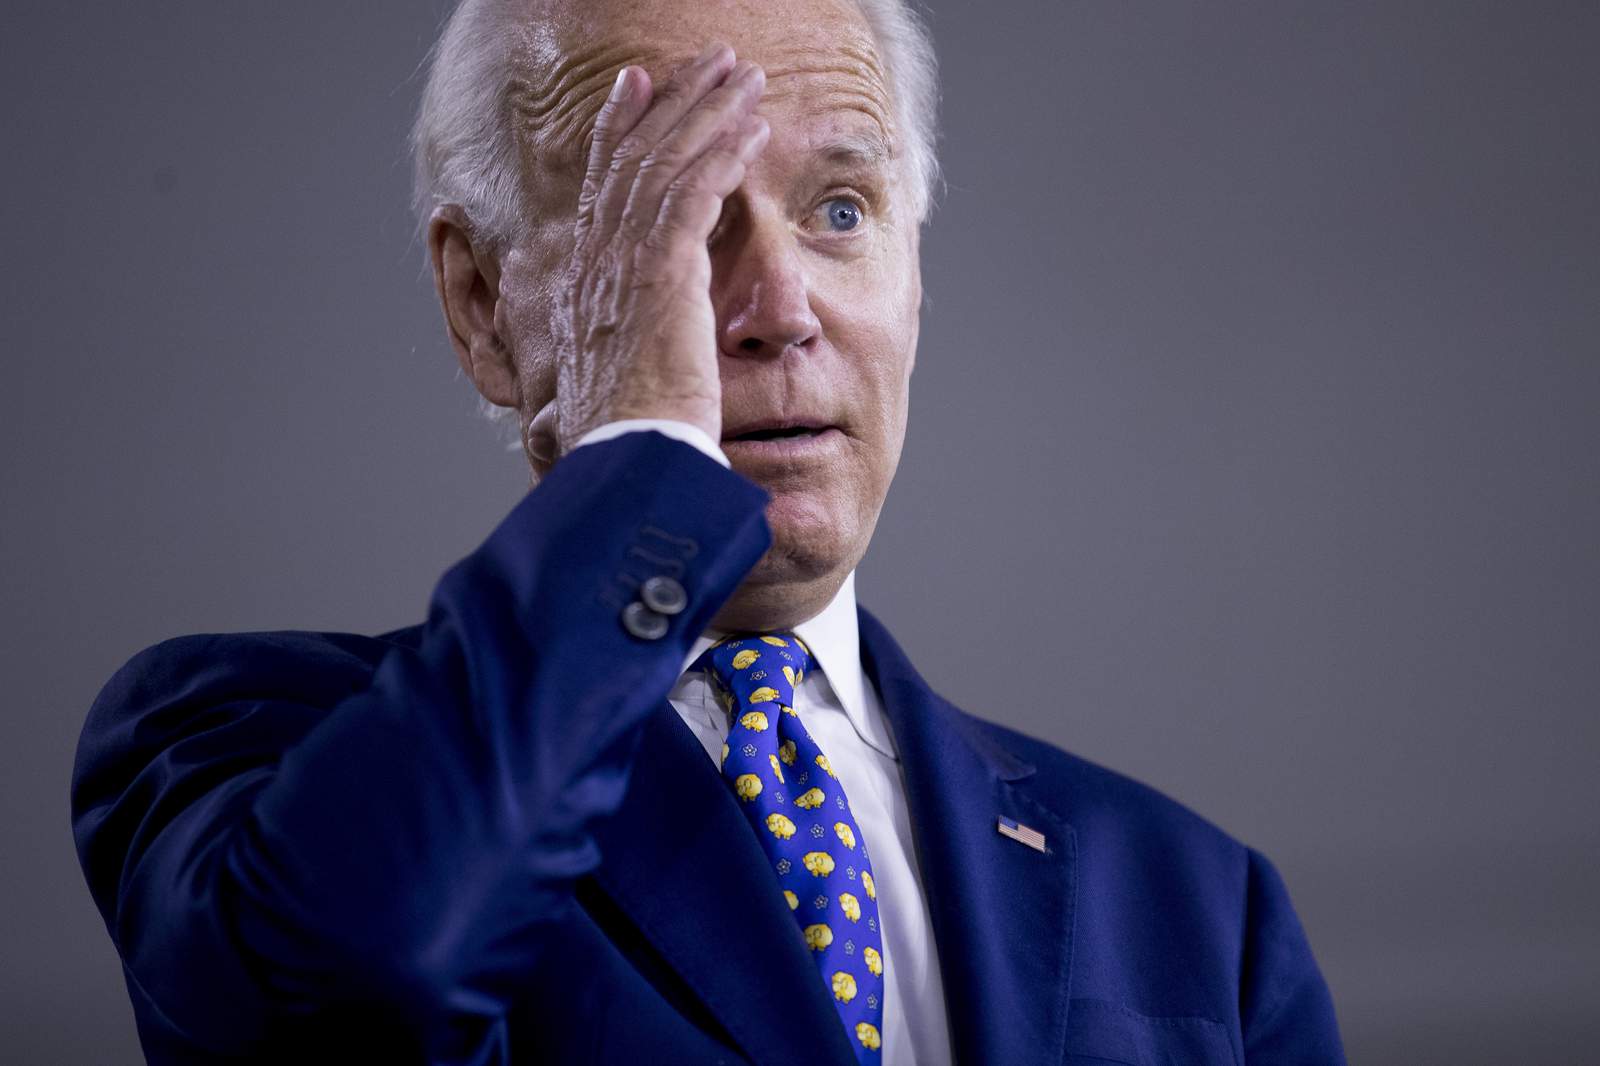 Biden on cognitive test: 'Why the hell would I take a test?'